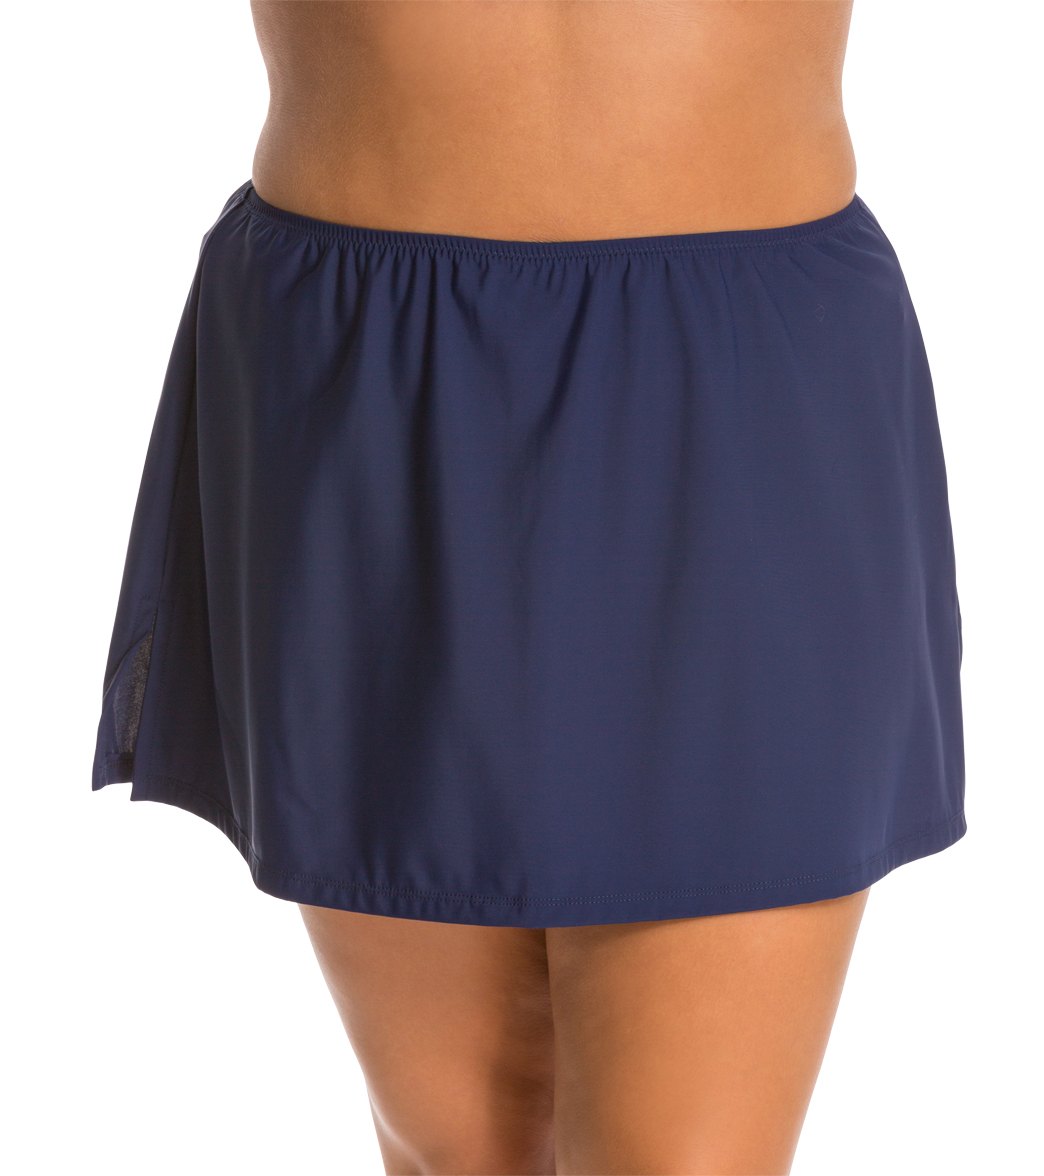 Topanga Plus Size Solid Cover Up Skirt - Navy 18W Nylon/Spandex - Swimoutlet.com